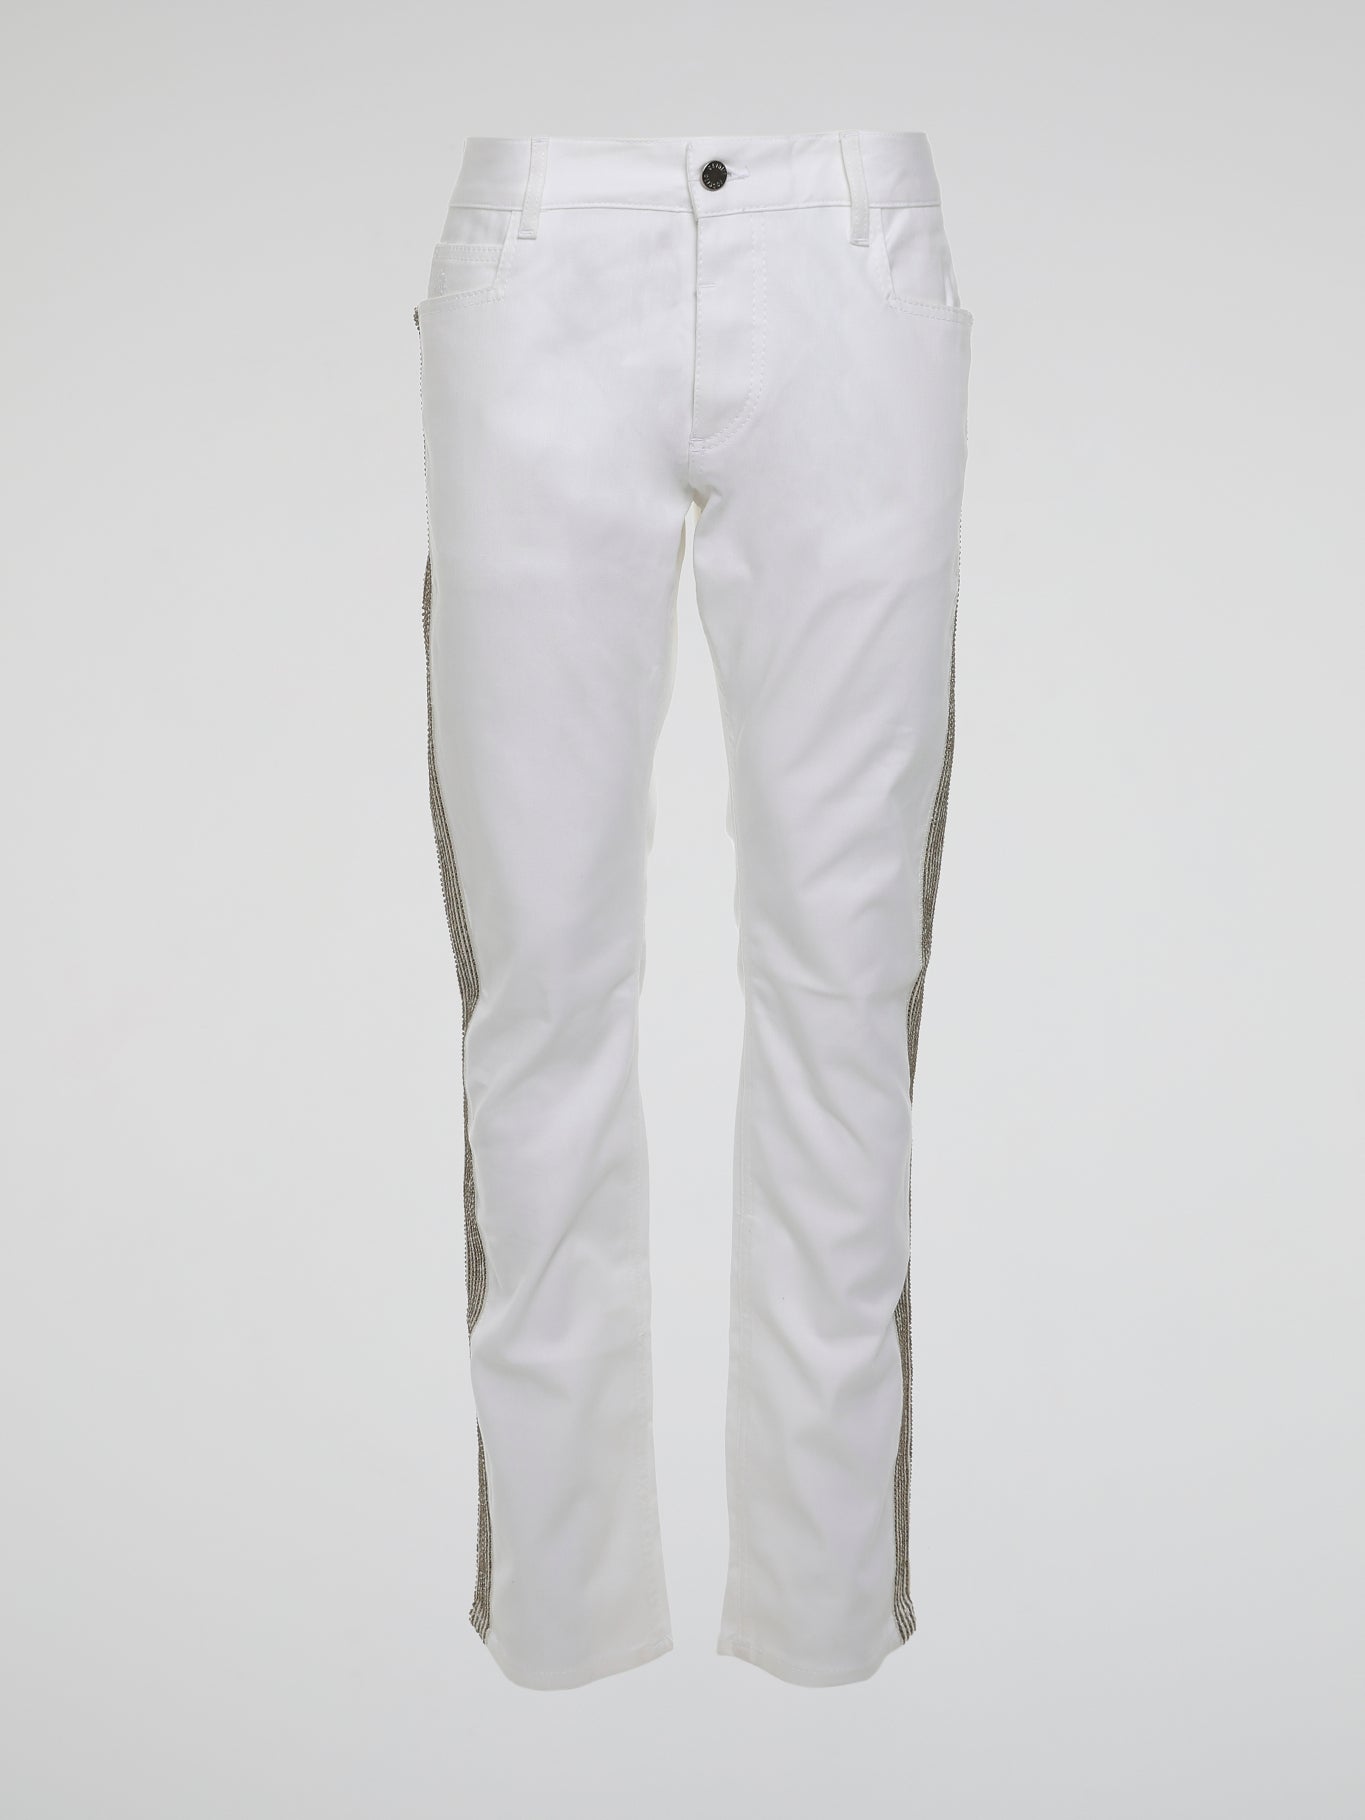 Step into the realm of high fashion with these White Studded Trousers by Roberto Cavalli. Made for those who dare to be different, these trousers feature meticulous studded details that add a touch of rebellious glamour. With their sleek design and luxurious fabric, they are the ultimate statement piece for any fashion-forward individual.